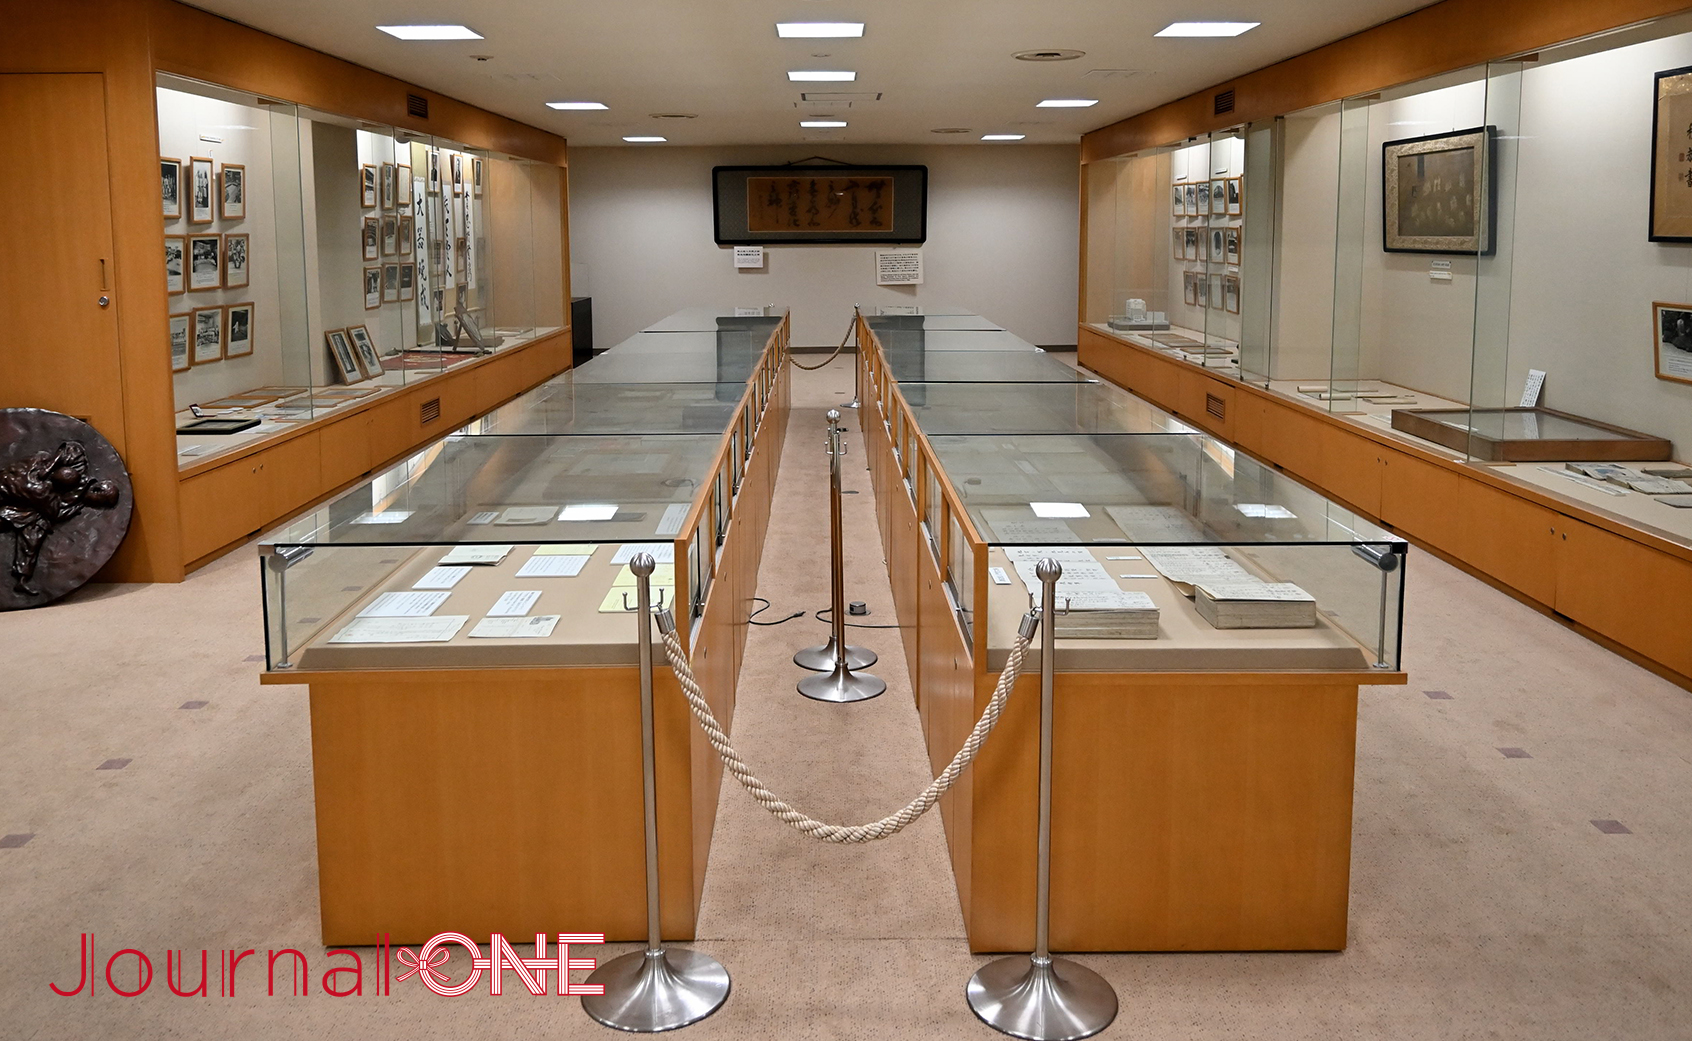 The Kodokan Judo Museum and Library:Photo by Journal-ONE